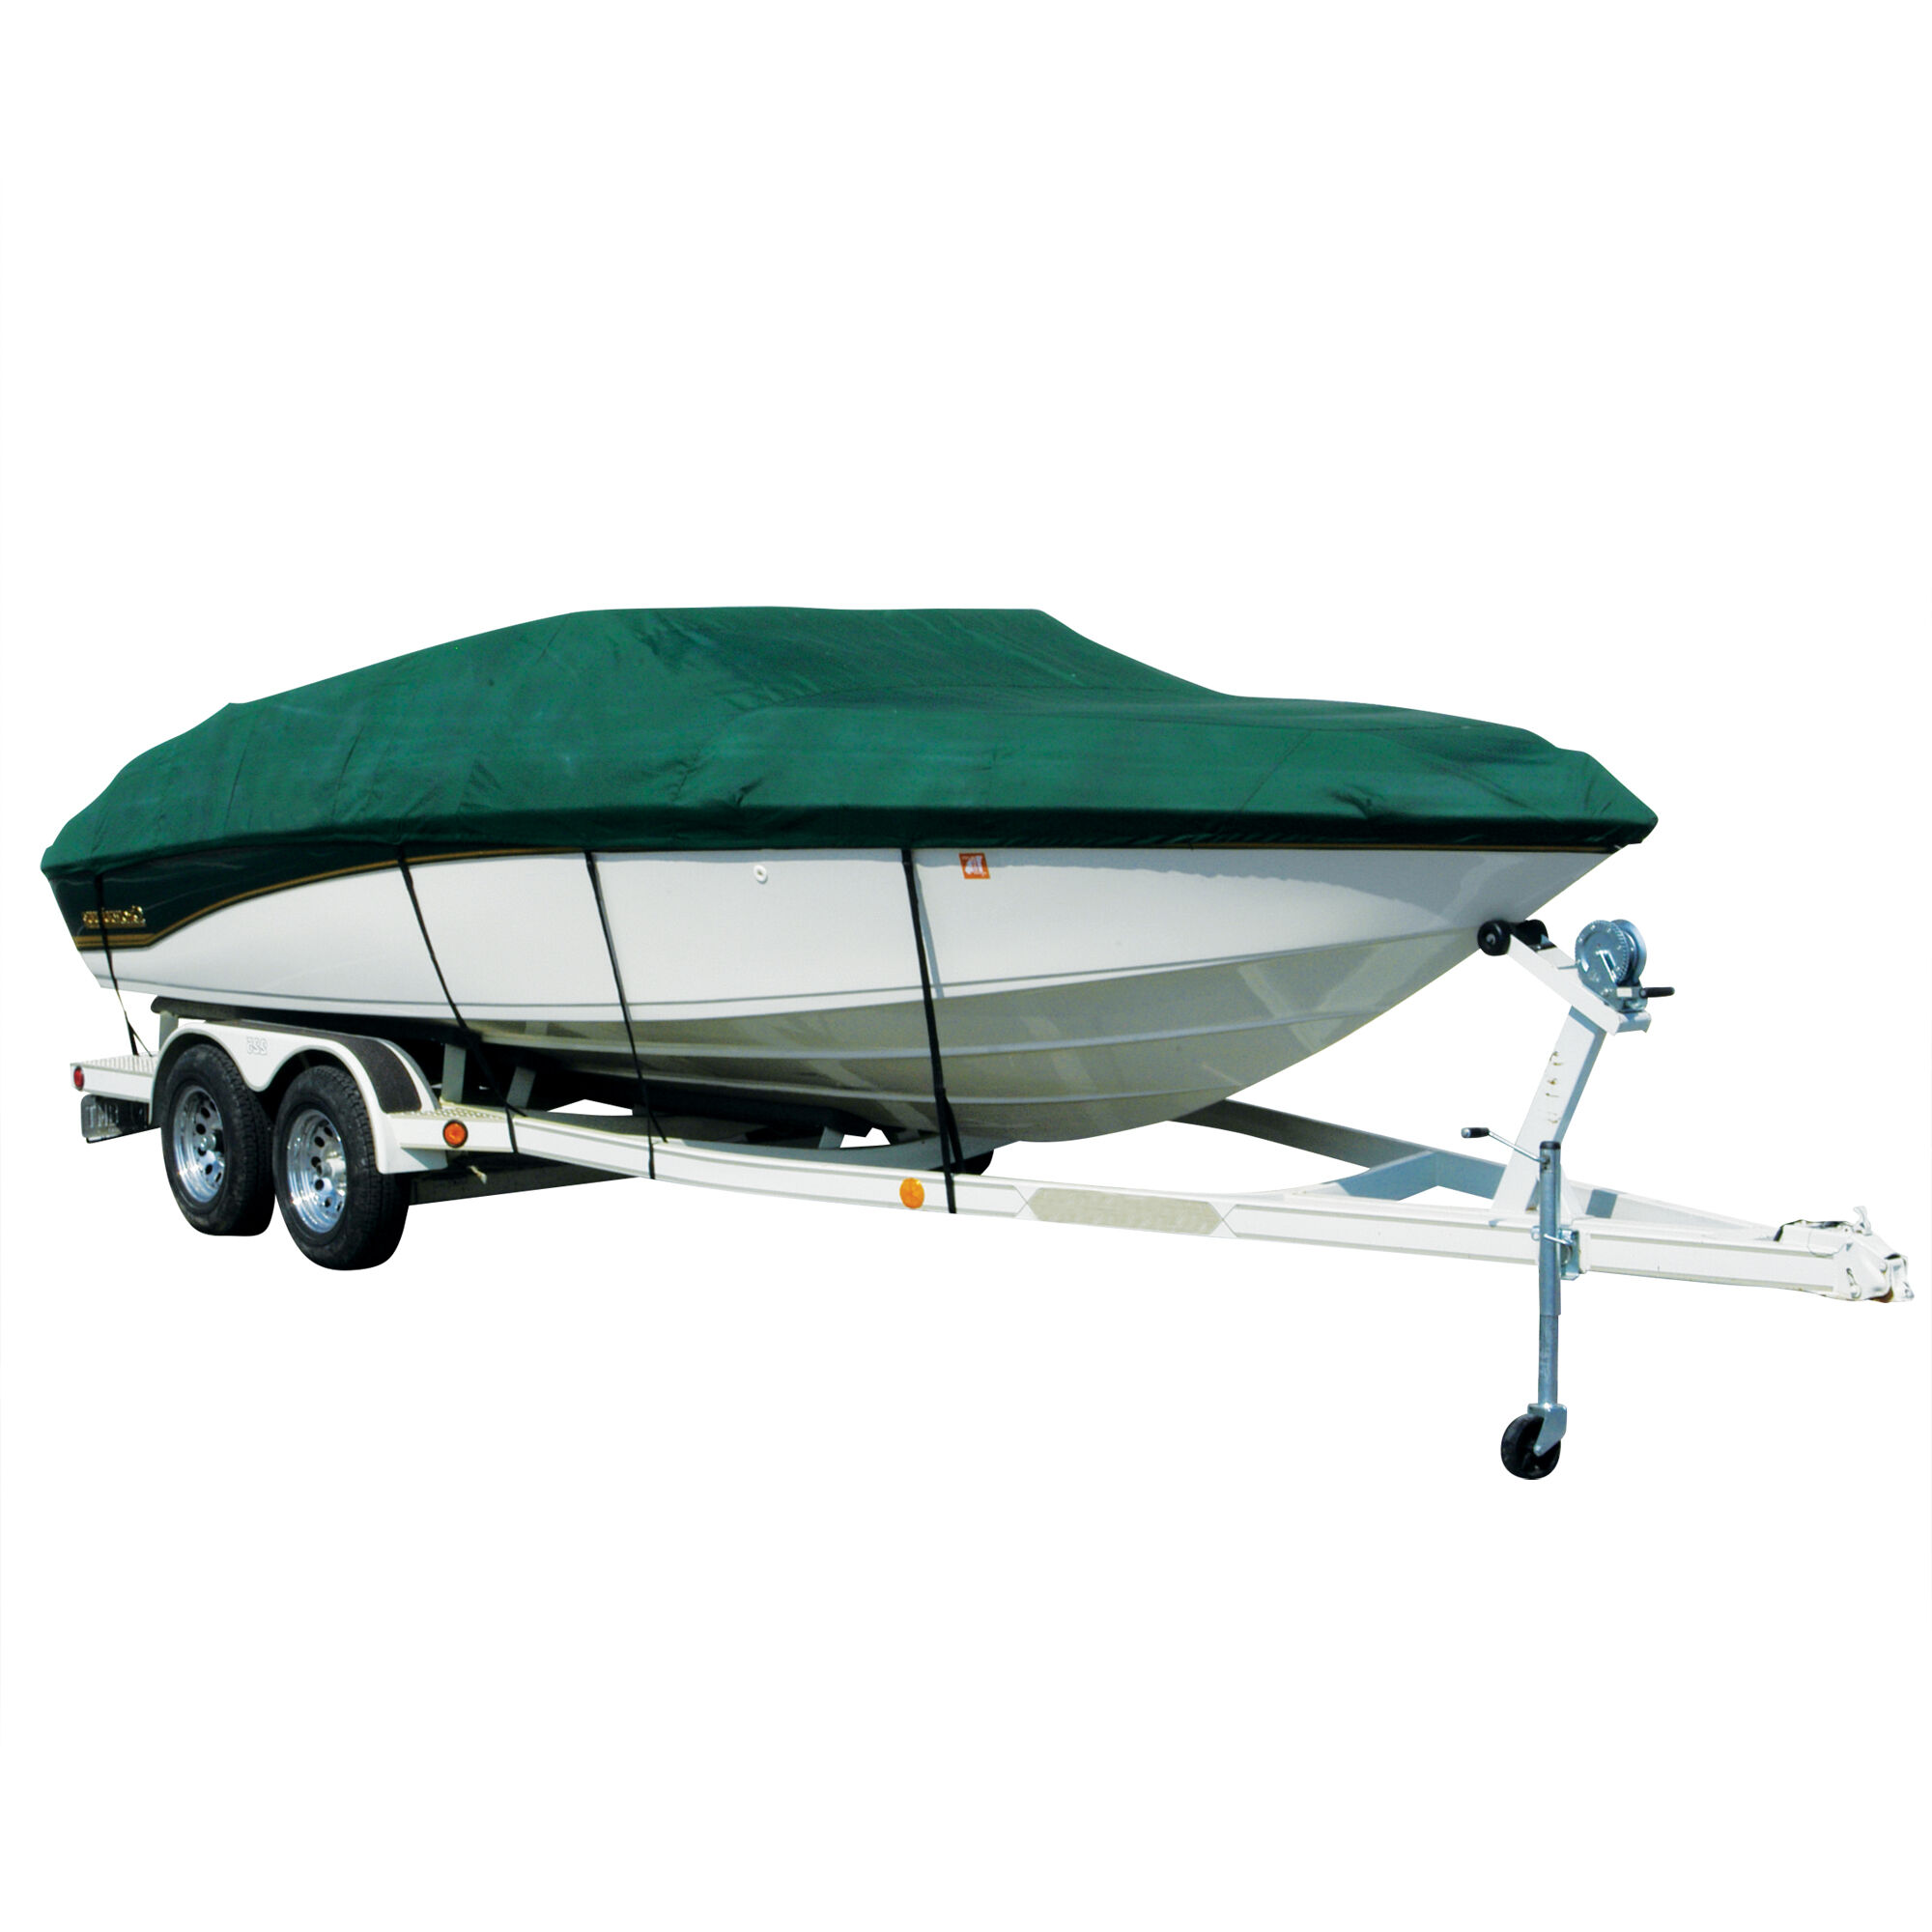 Covermate Exact Fit Sharkskin Boat Cover For Tige 2002 Fslm Does Not Cover Swim PLATFORMm in Forest Green